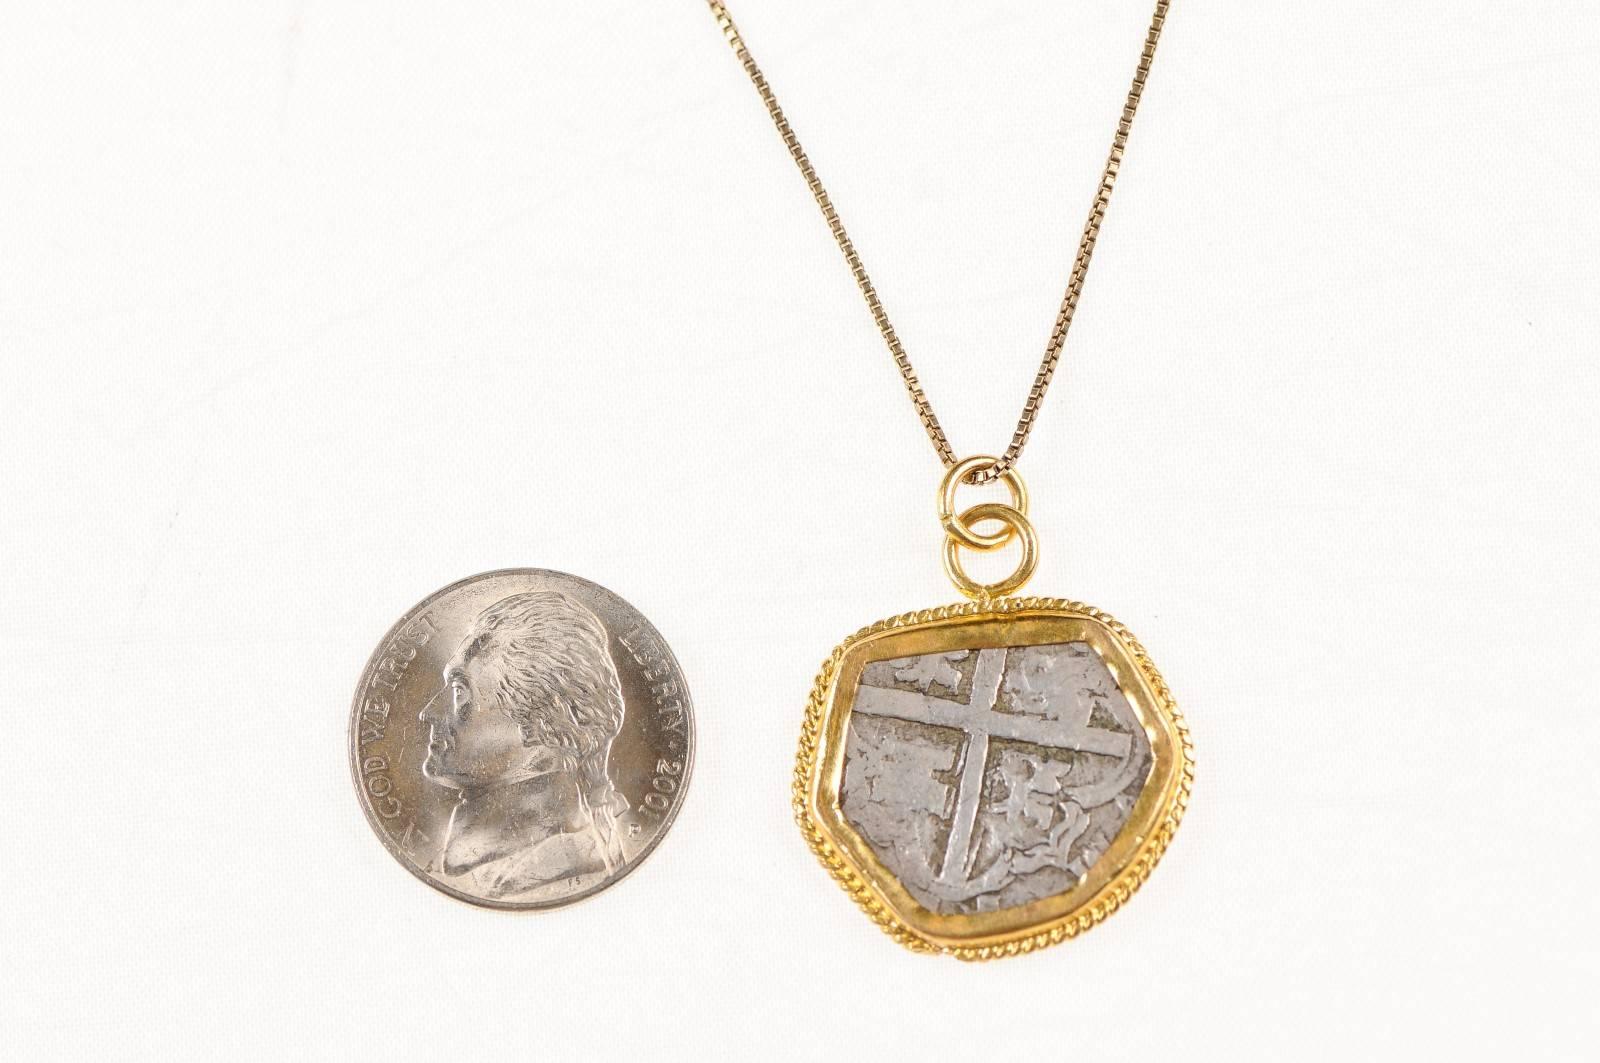 Spanish Silver Cob Coin circa 1500s Set in Rope Accented 22 Karat Gold Bezel In Good Condition For Sale In Atlanta, GA